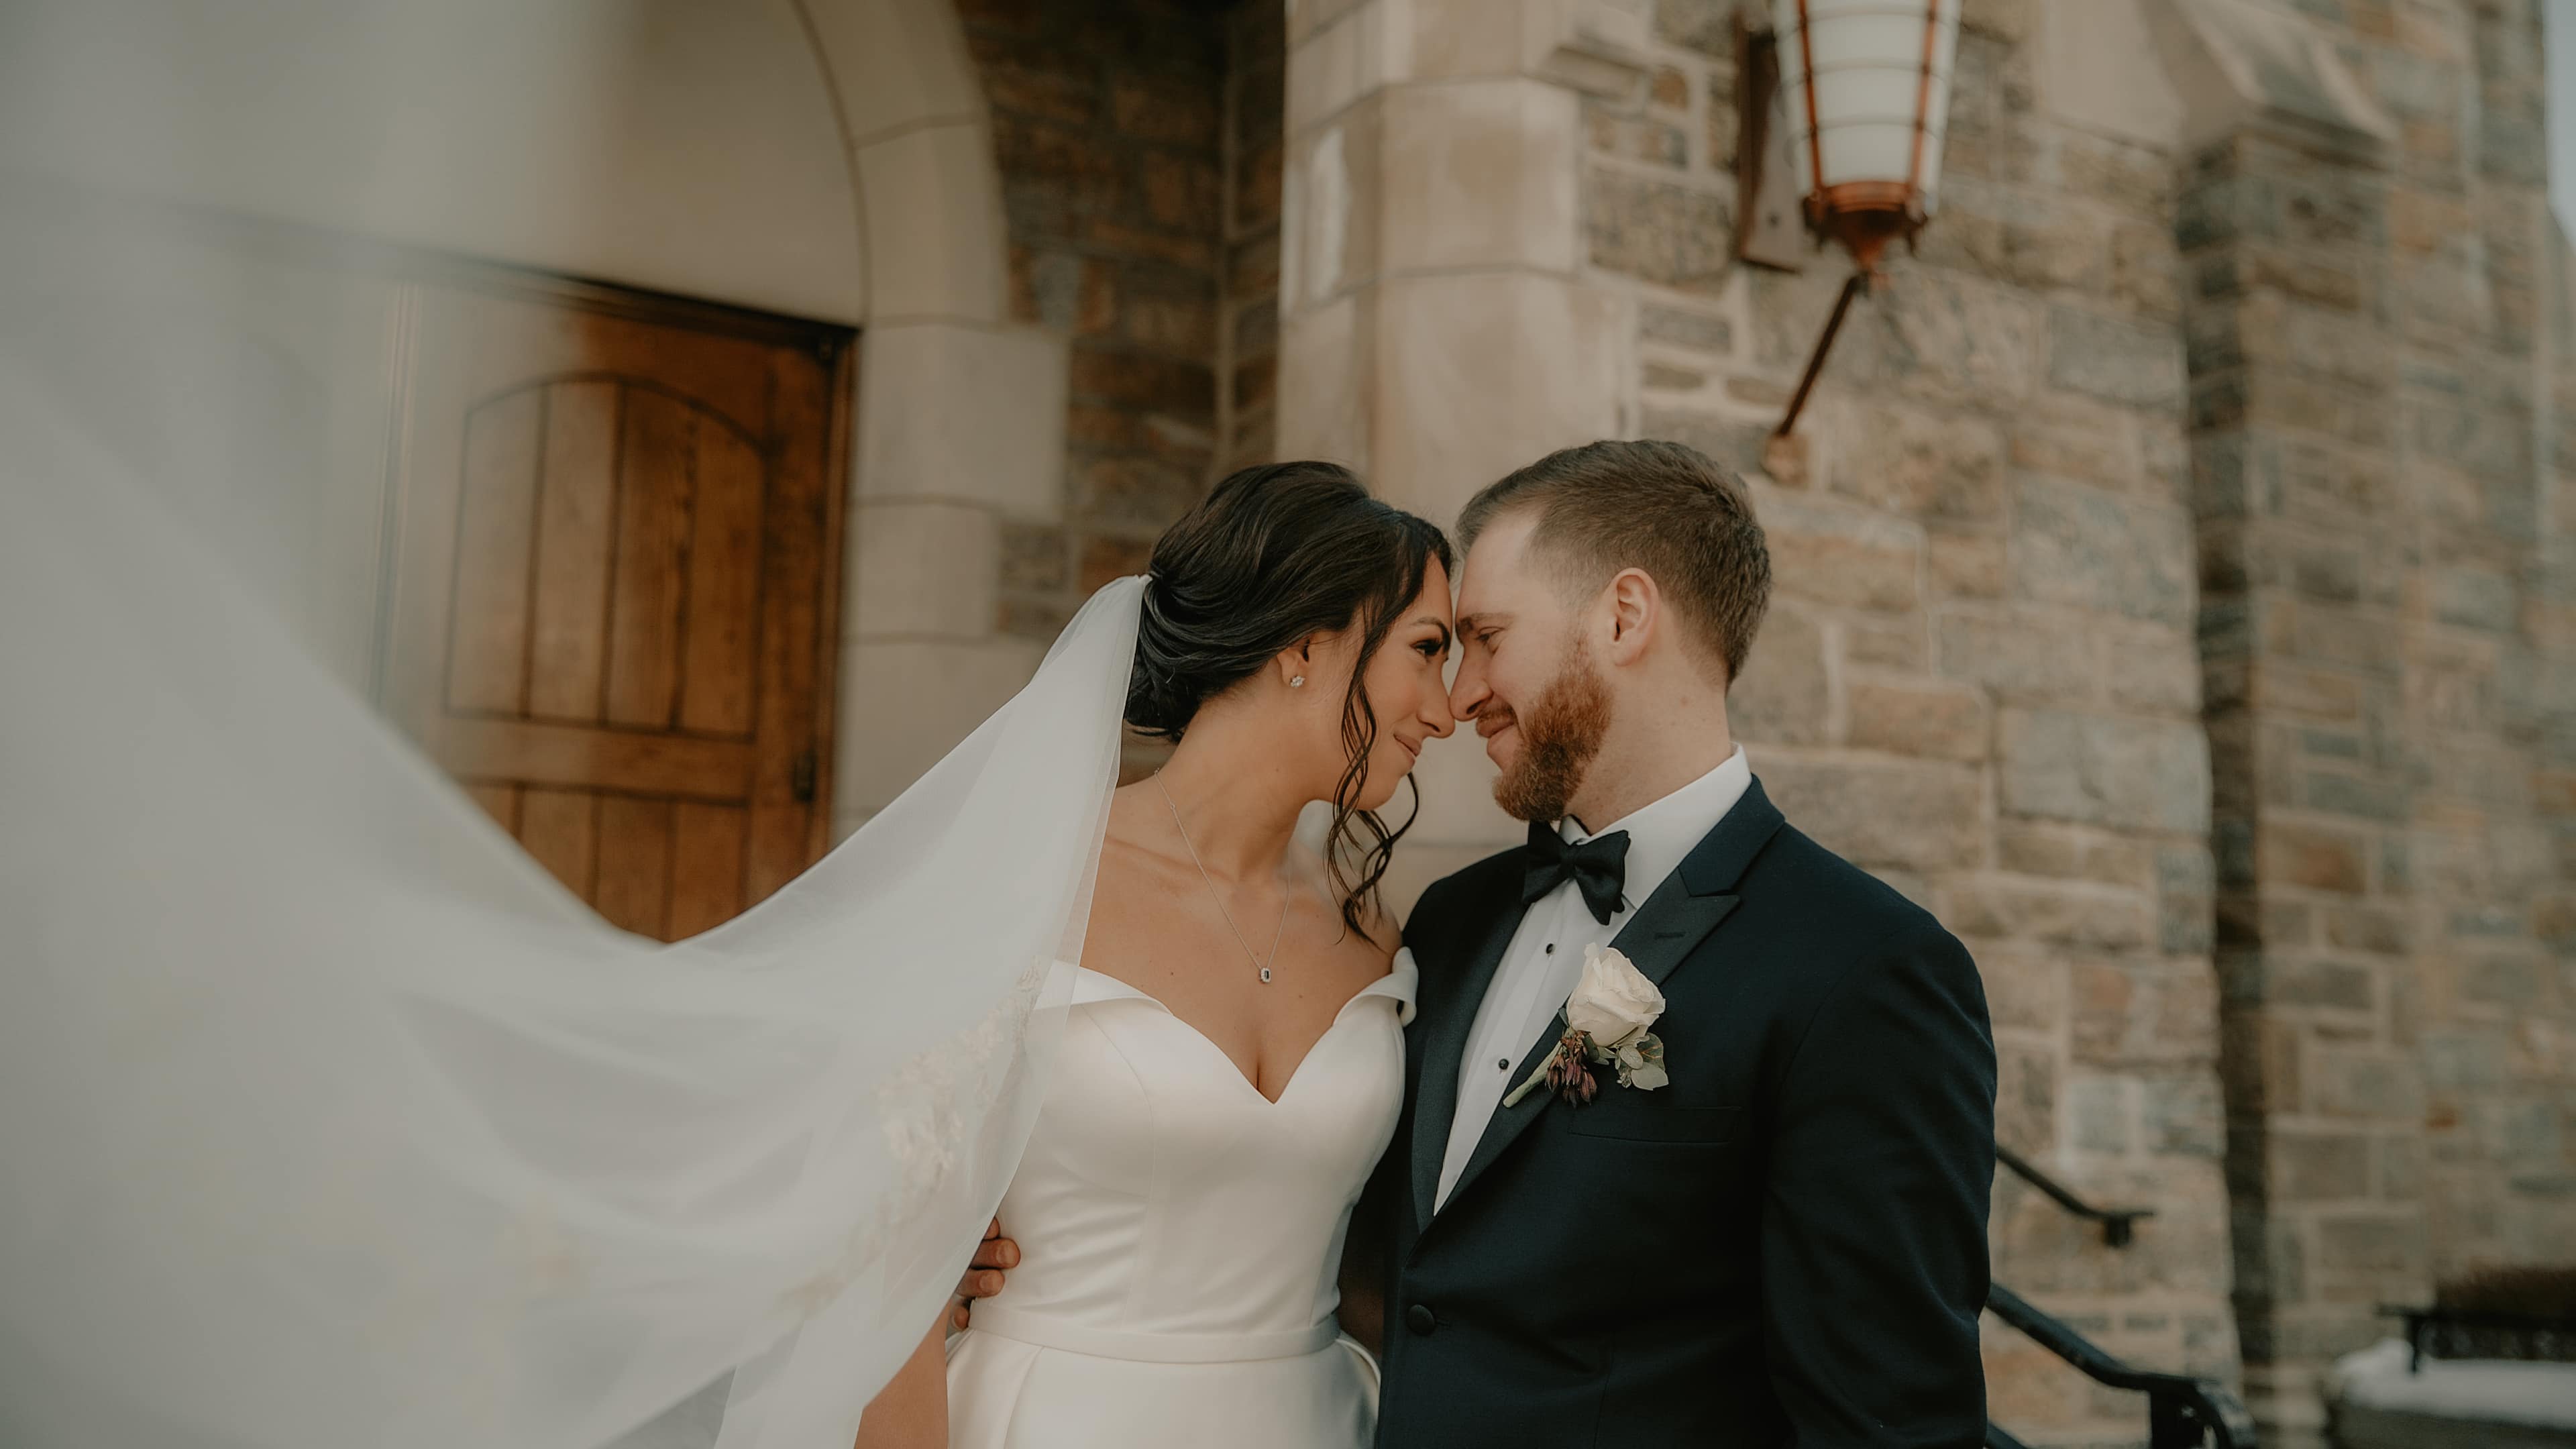 Jenna and Joes Hudson Valley Micro Wedding at the Annunciation Church in Yonkers New York